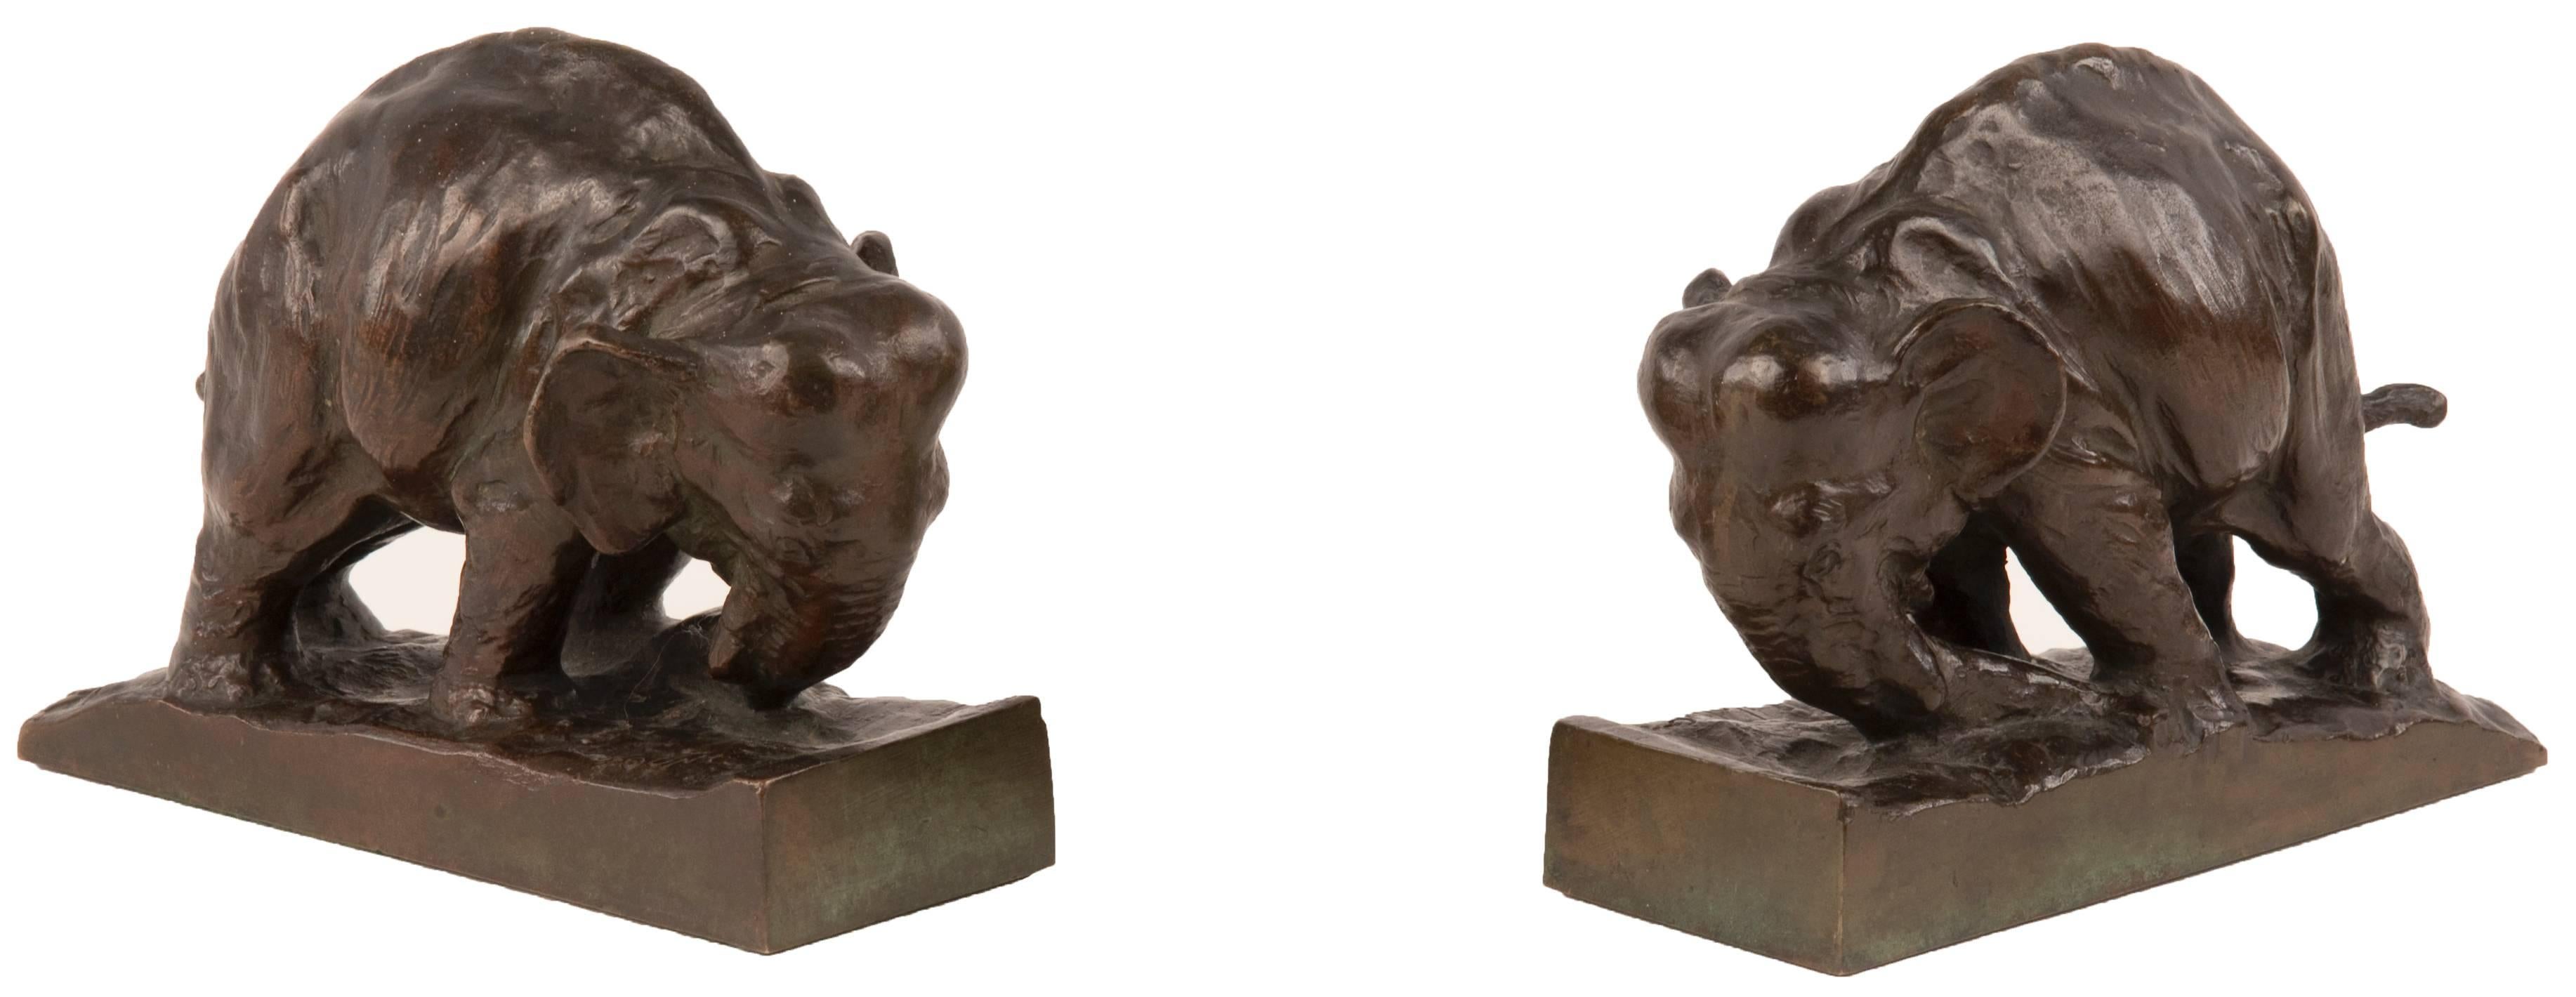 This pair of elephant bookends are cast in bronze with brown patina, and top of base incised with 